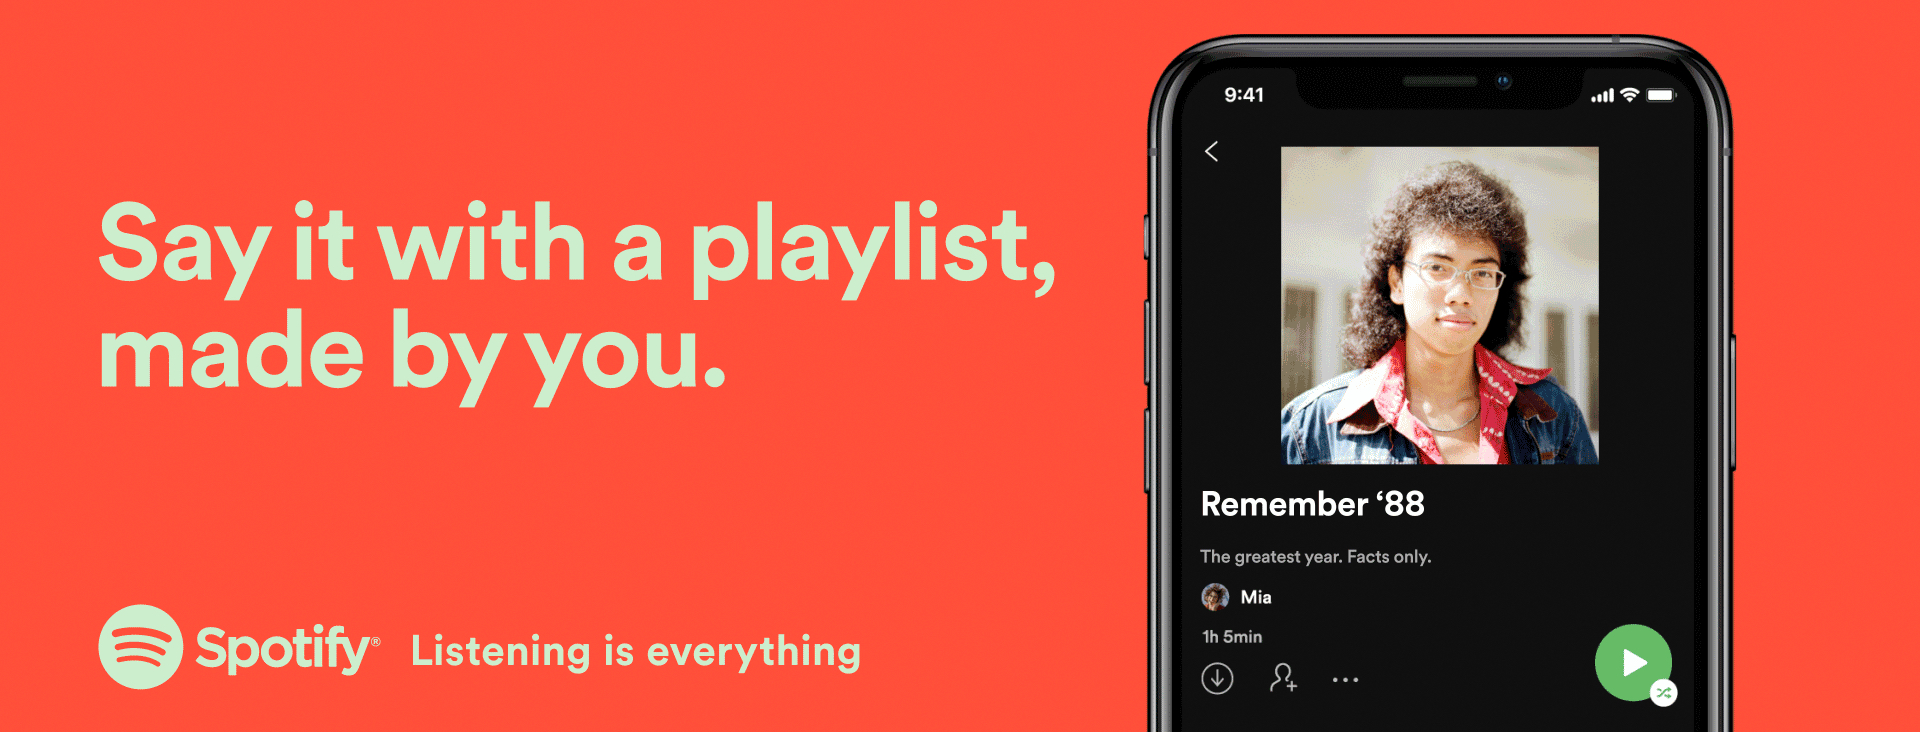 How to upload a custom playlist image from the Spotify mobile app